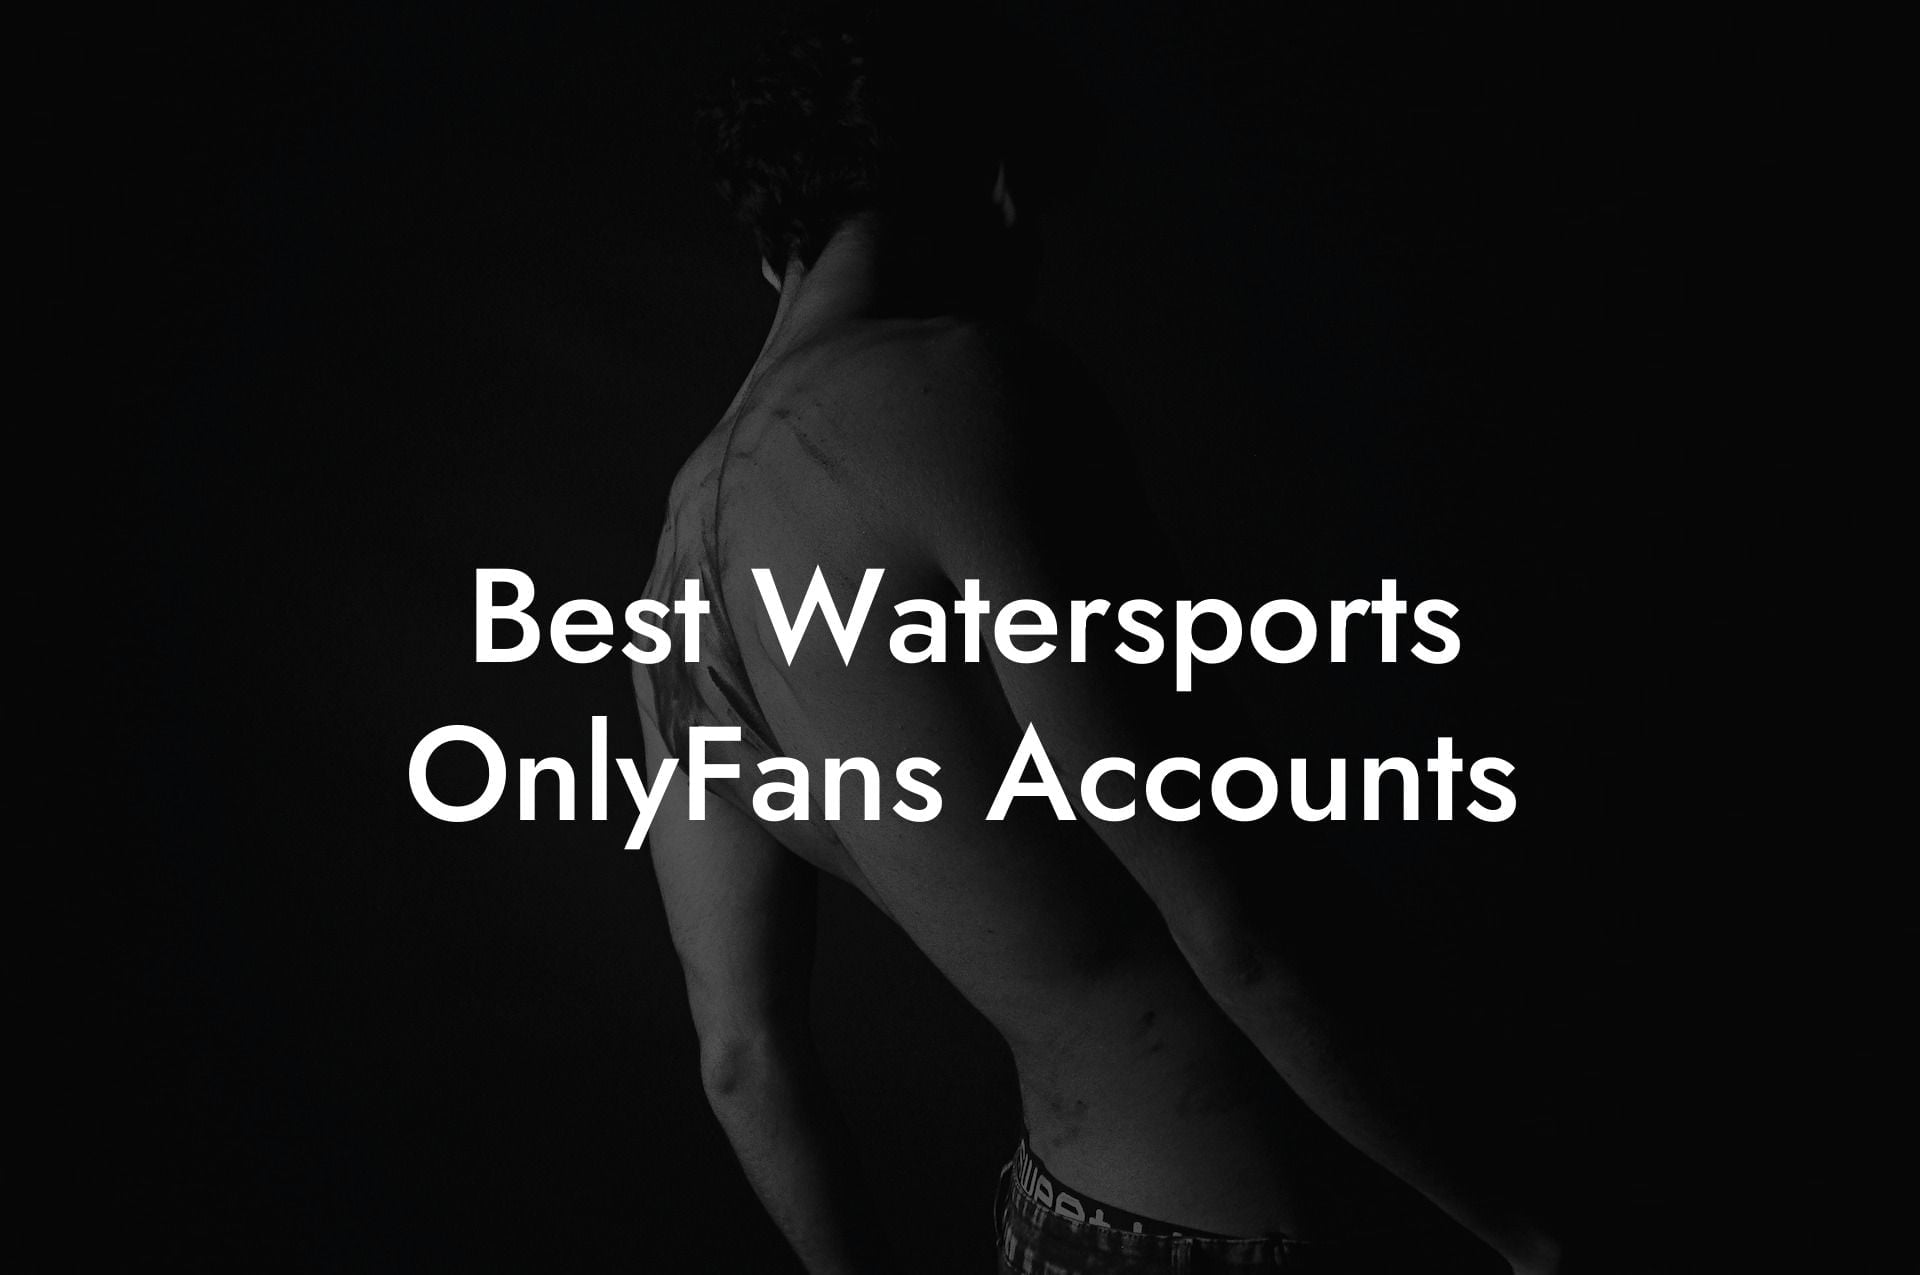 Best Watersports OnlyFans Accounts